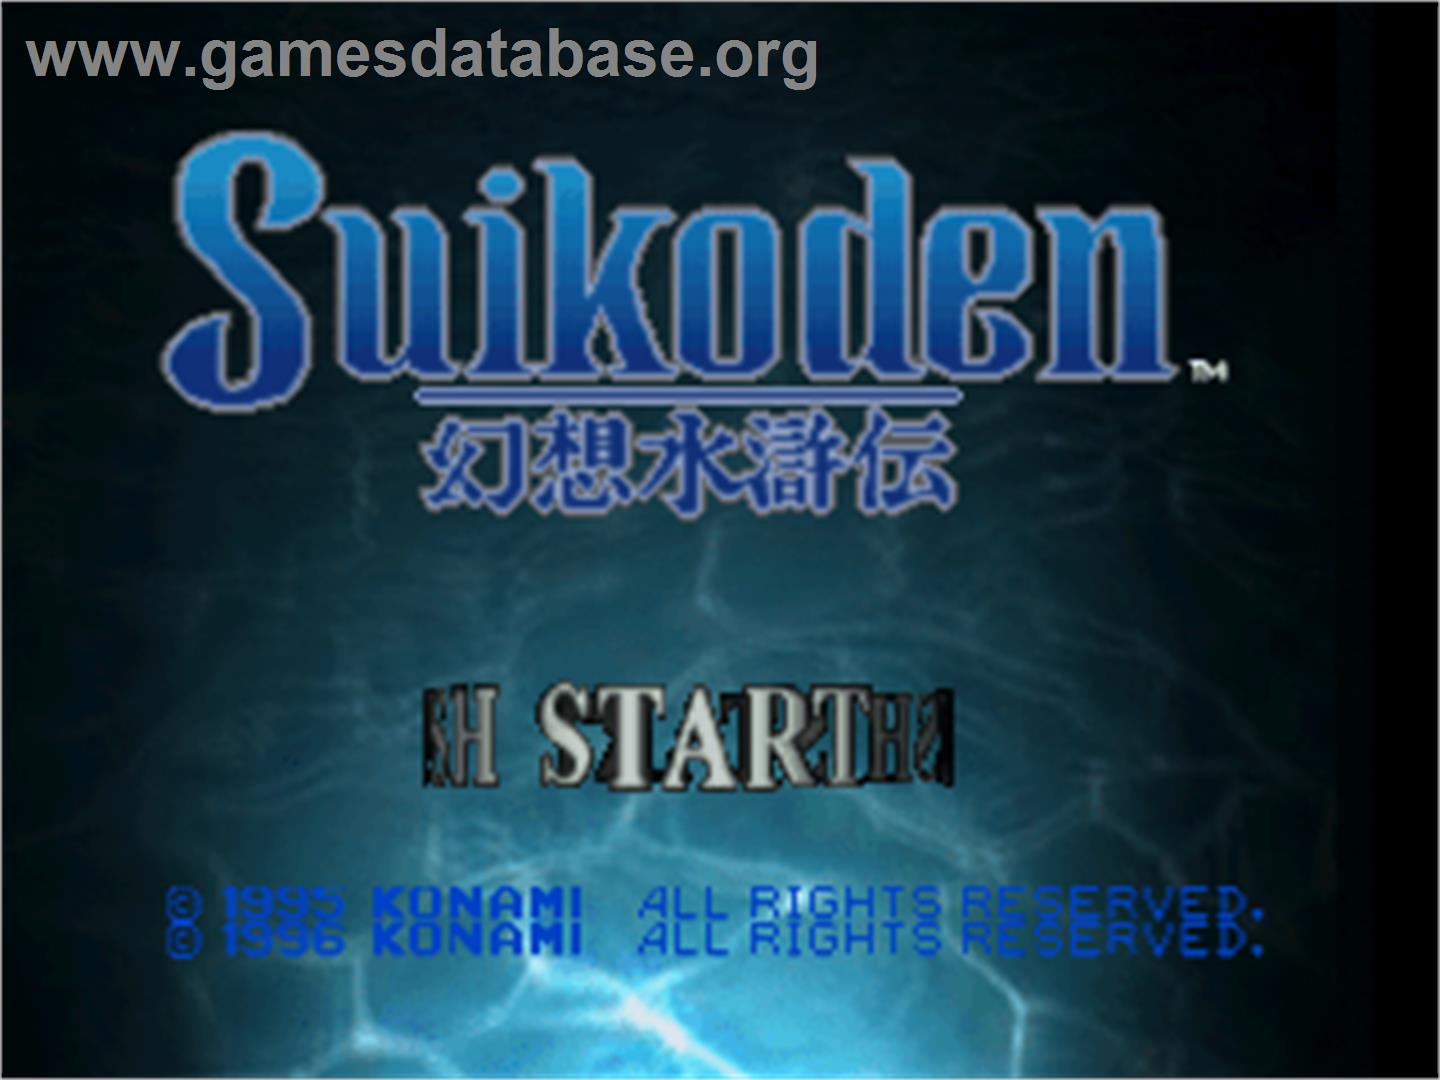 Suikoden - Sony Playstation - Artwork - Title Screen